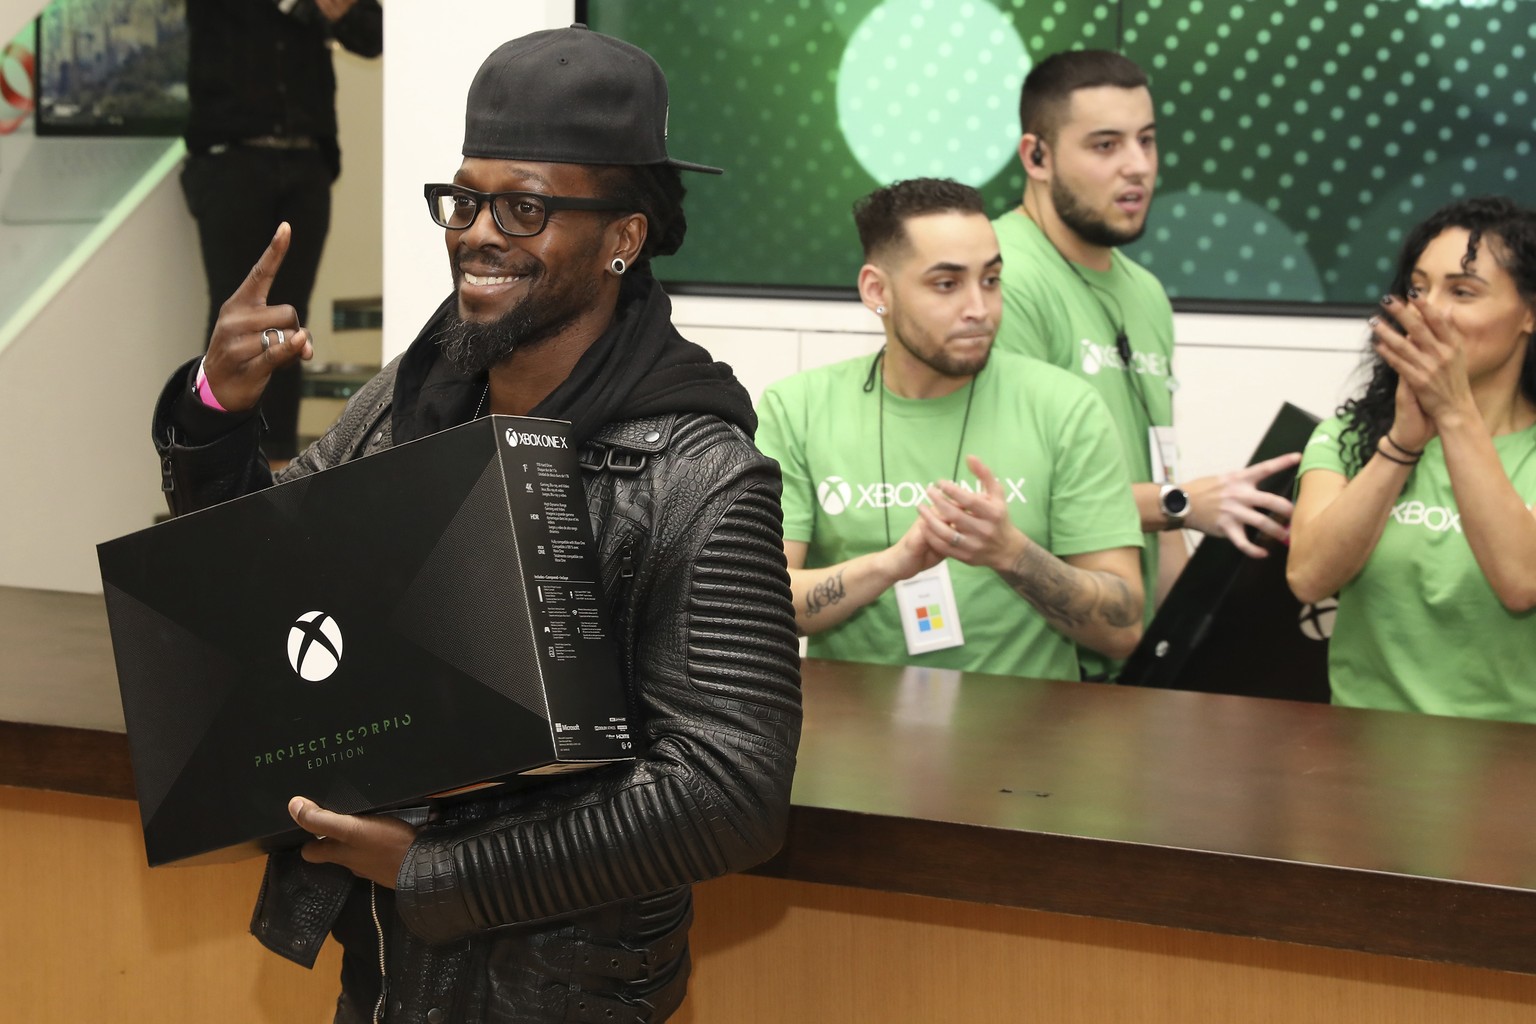 IMAGE DISTRIBUTED FOR MICROSOFT - A fan celebrates purchasing an Xbox One X Project Scorpio Edition at the flagship Microsoft Store on Fifth Avenue on Monday, Nov. 6, 2017, in New York City. (Photo by ...